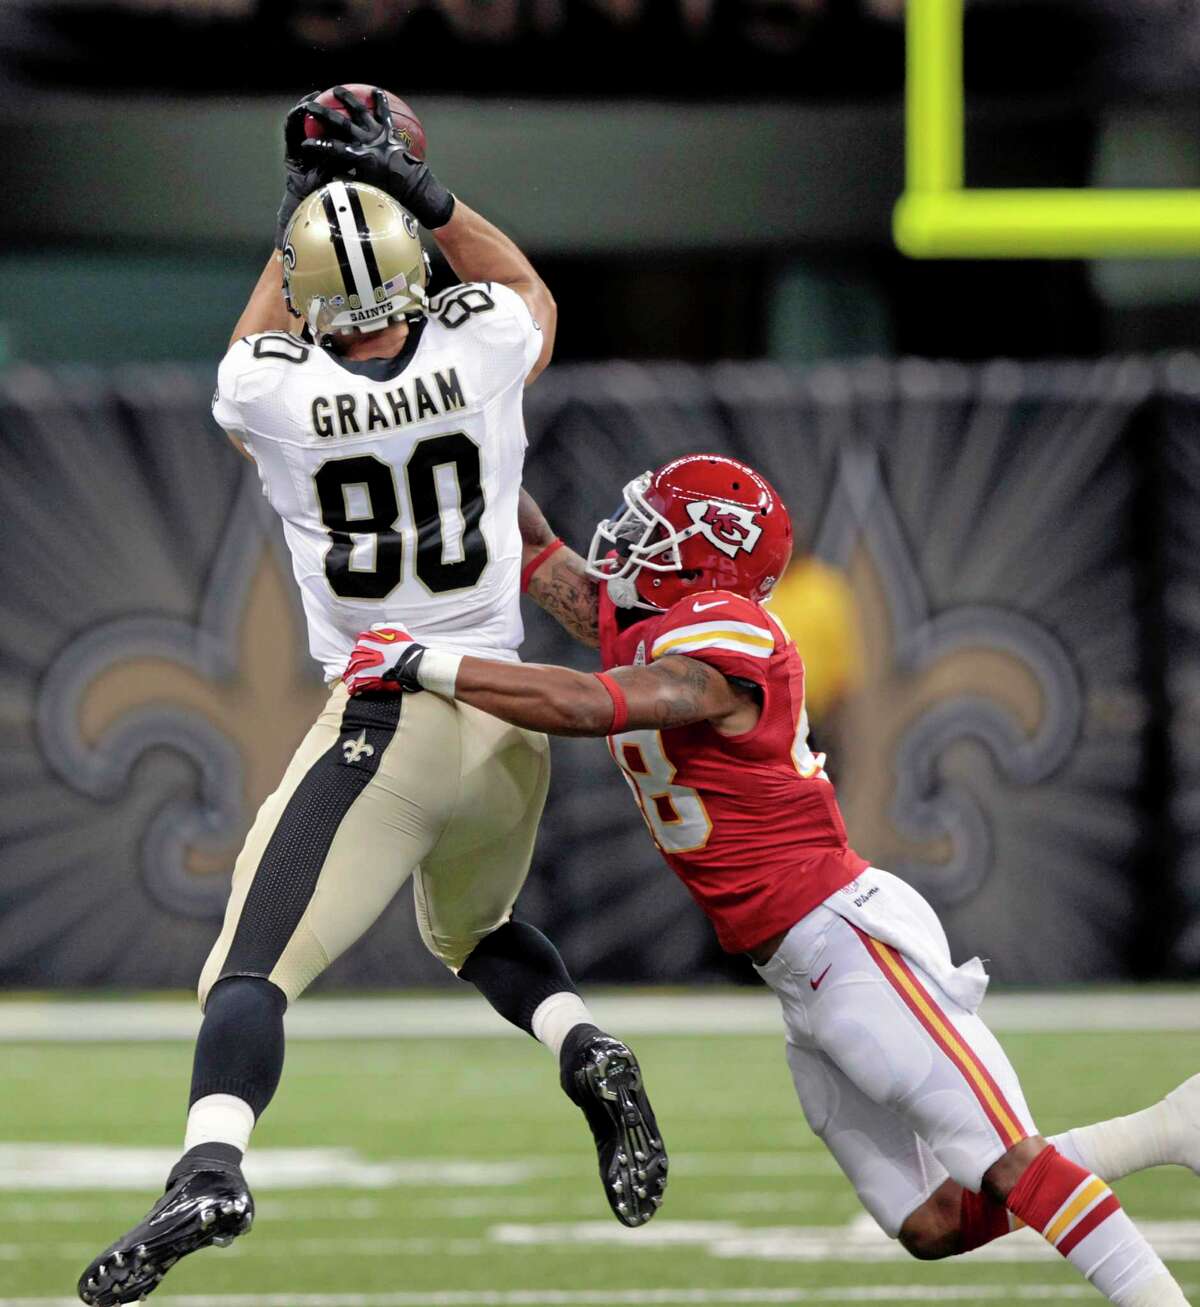 New Orleans Saints tight end Jimmy Graham (80) pulls in a pass over Kansas City Chiefs safety Bradley McDougald during the first half of an NFL preseason football game at the Mercedes-Benz Superdome in New Orleans, Friday, Aug. 9, 2013. (AP Photo/Matthew Hinton)